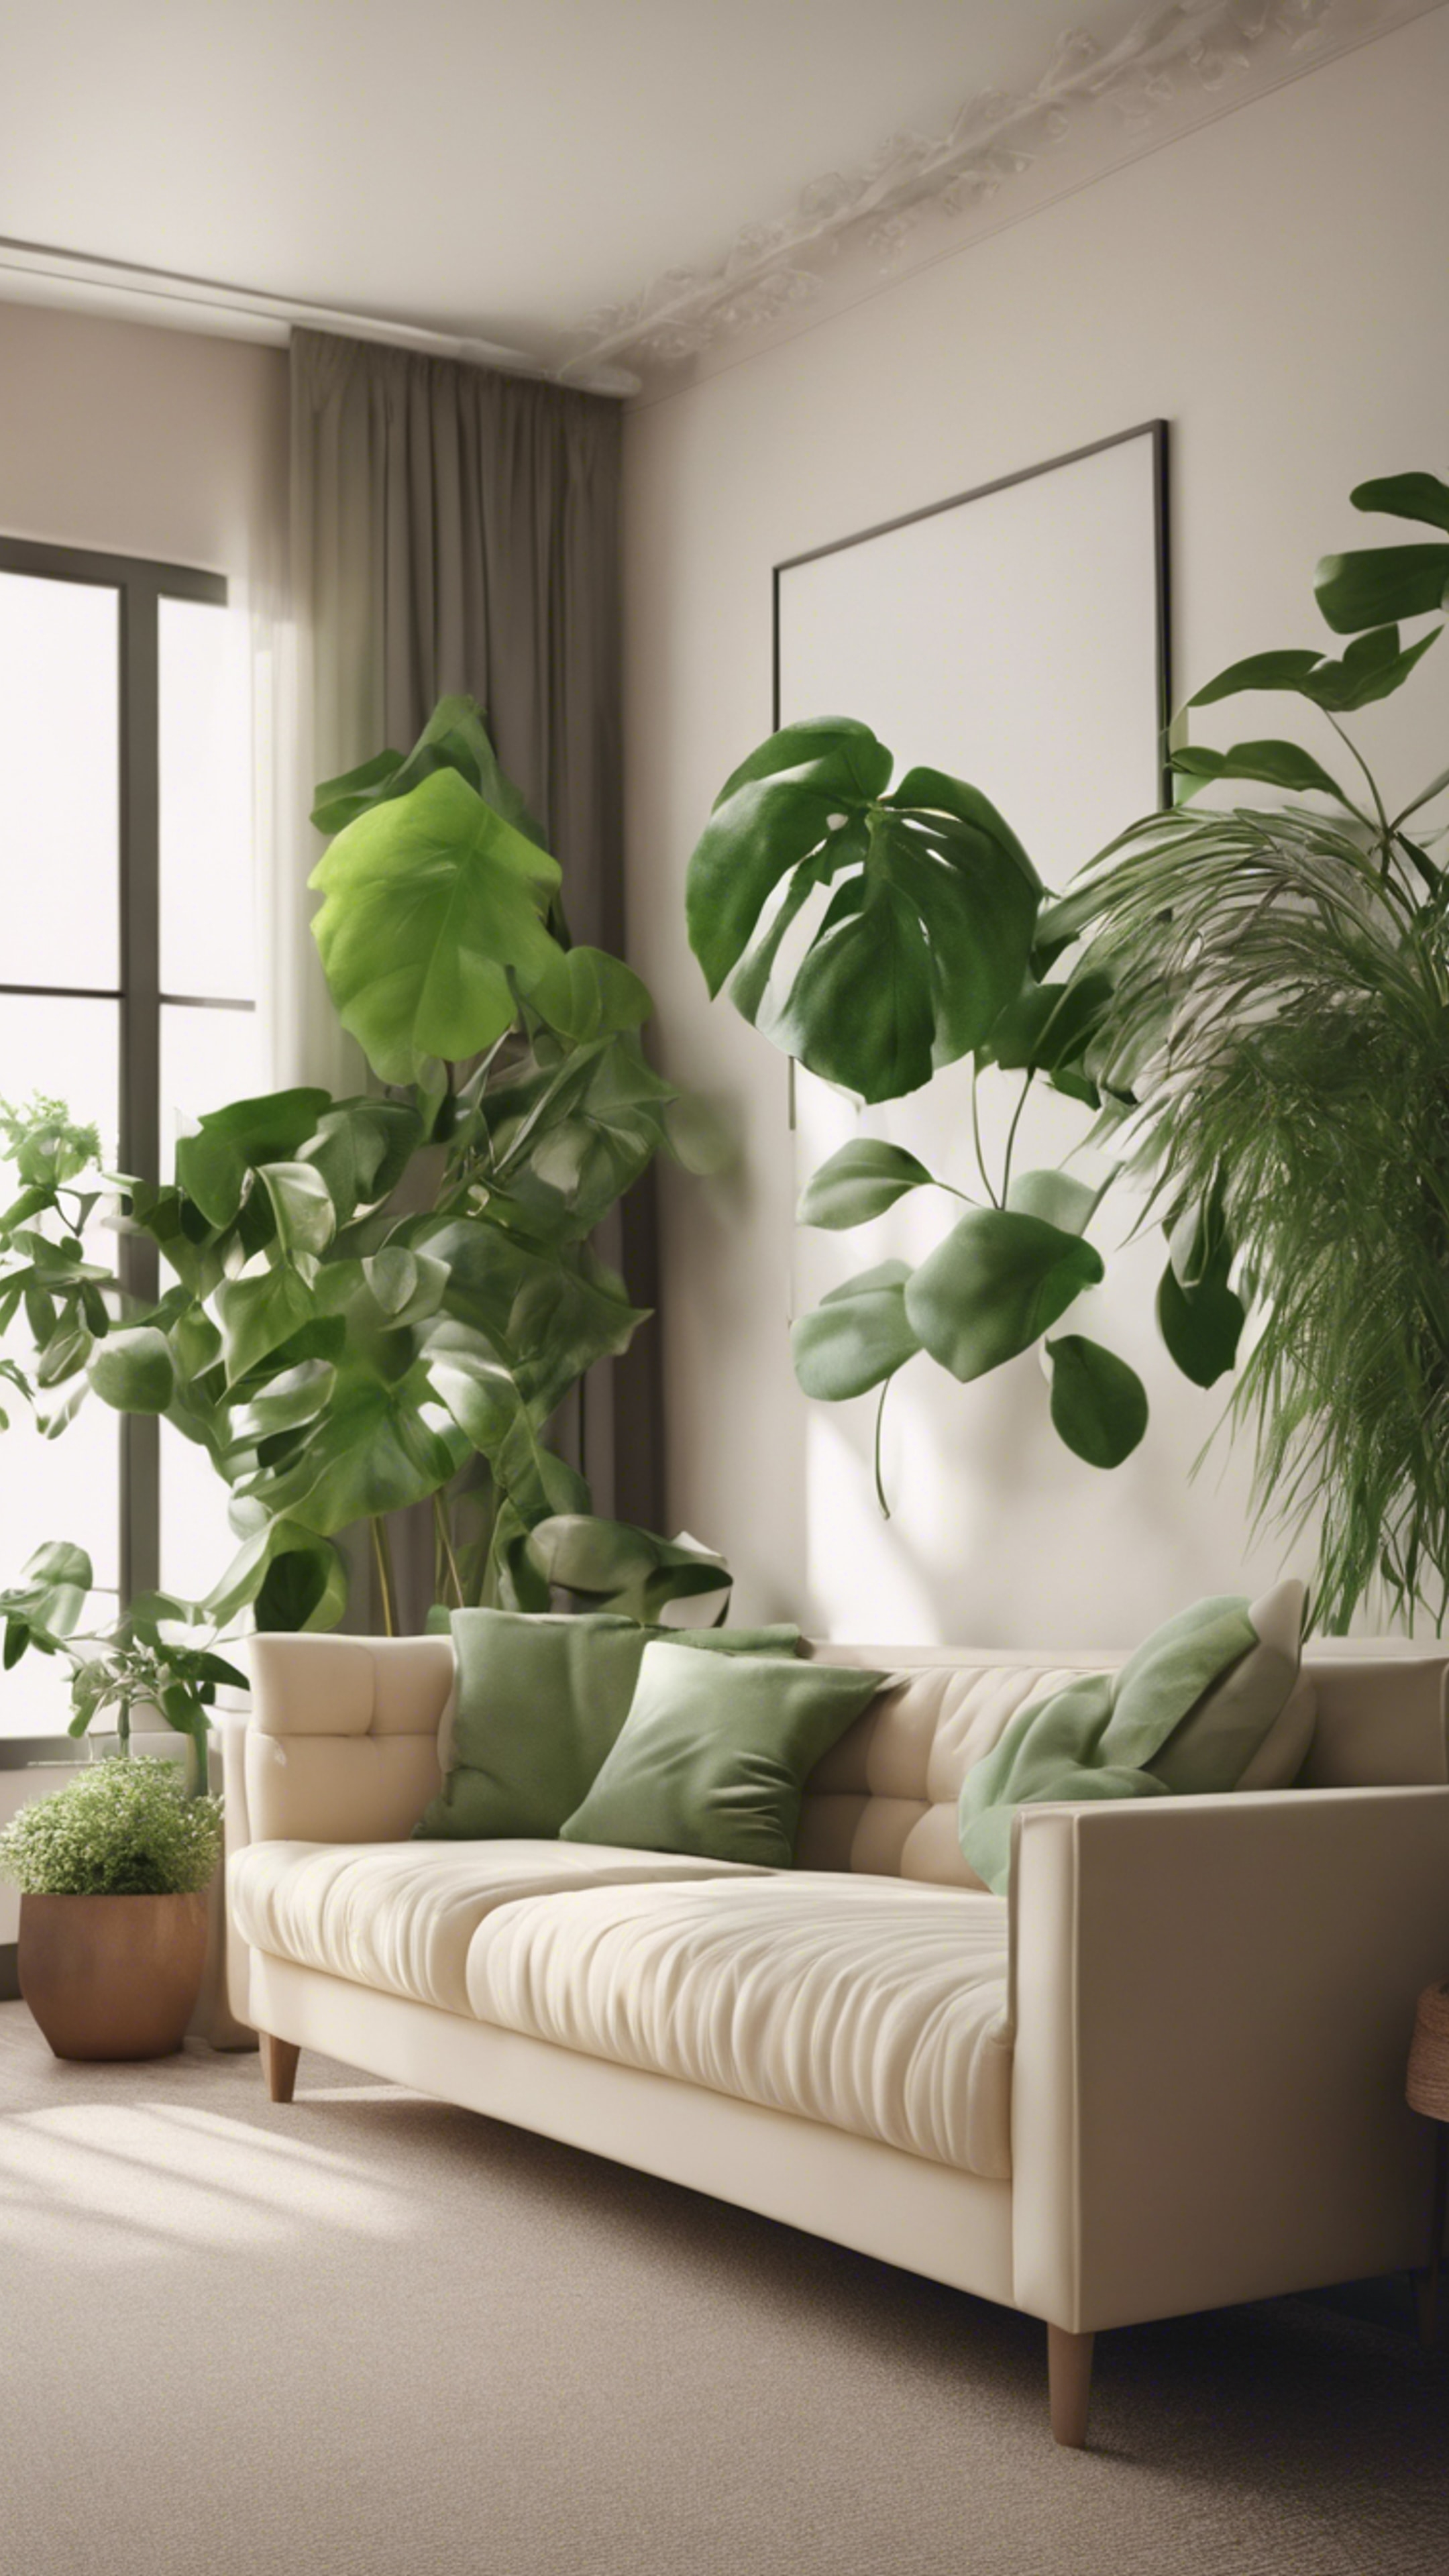 A simplistic living room featuring a cream couch contrasted with a natural green aesthetic of indoor plants Валлпапер[57c4f329650745189cc4]